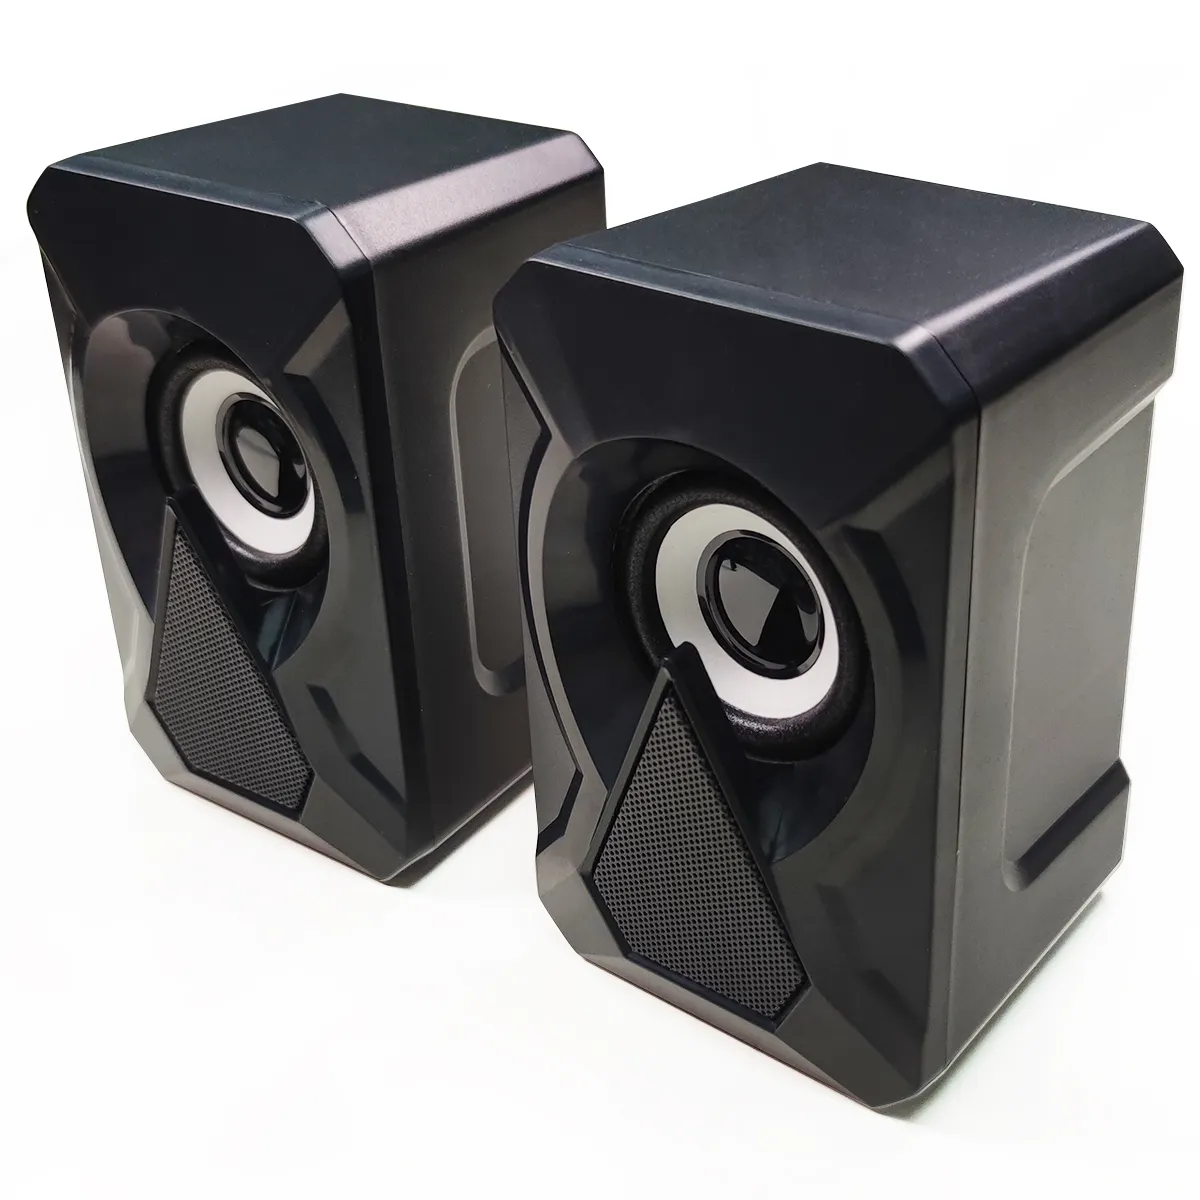 Desktop Speakers, 2.0 Channel PC Computer Stereo Speaker Colorful LED Modes, USB Powered w/ 3.5mm Cable